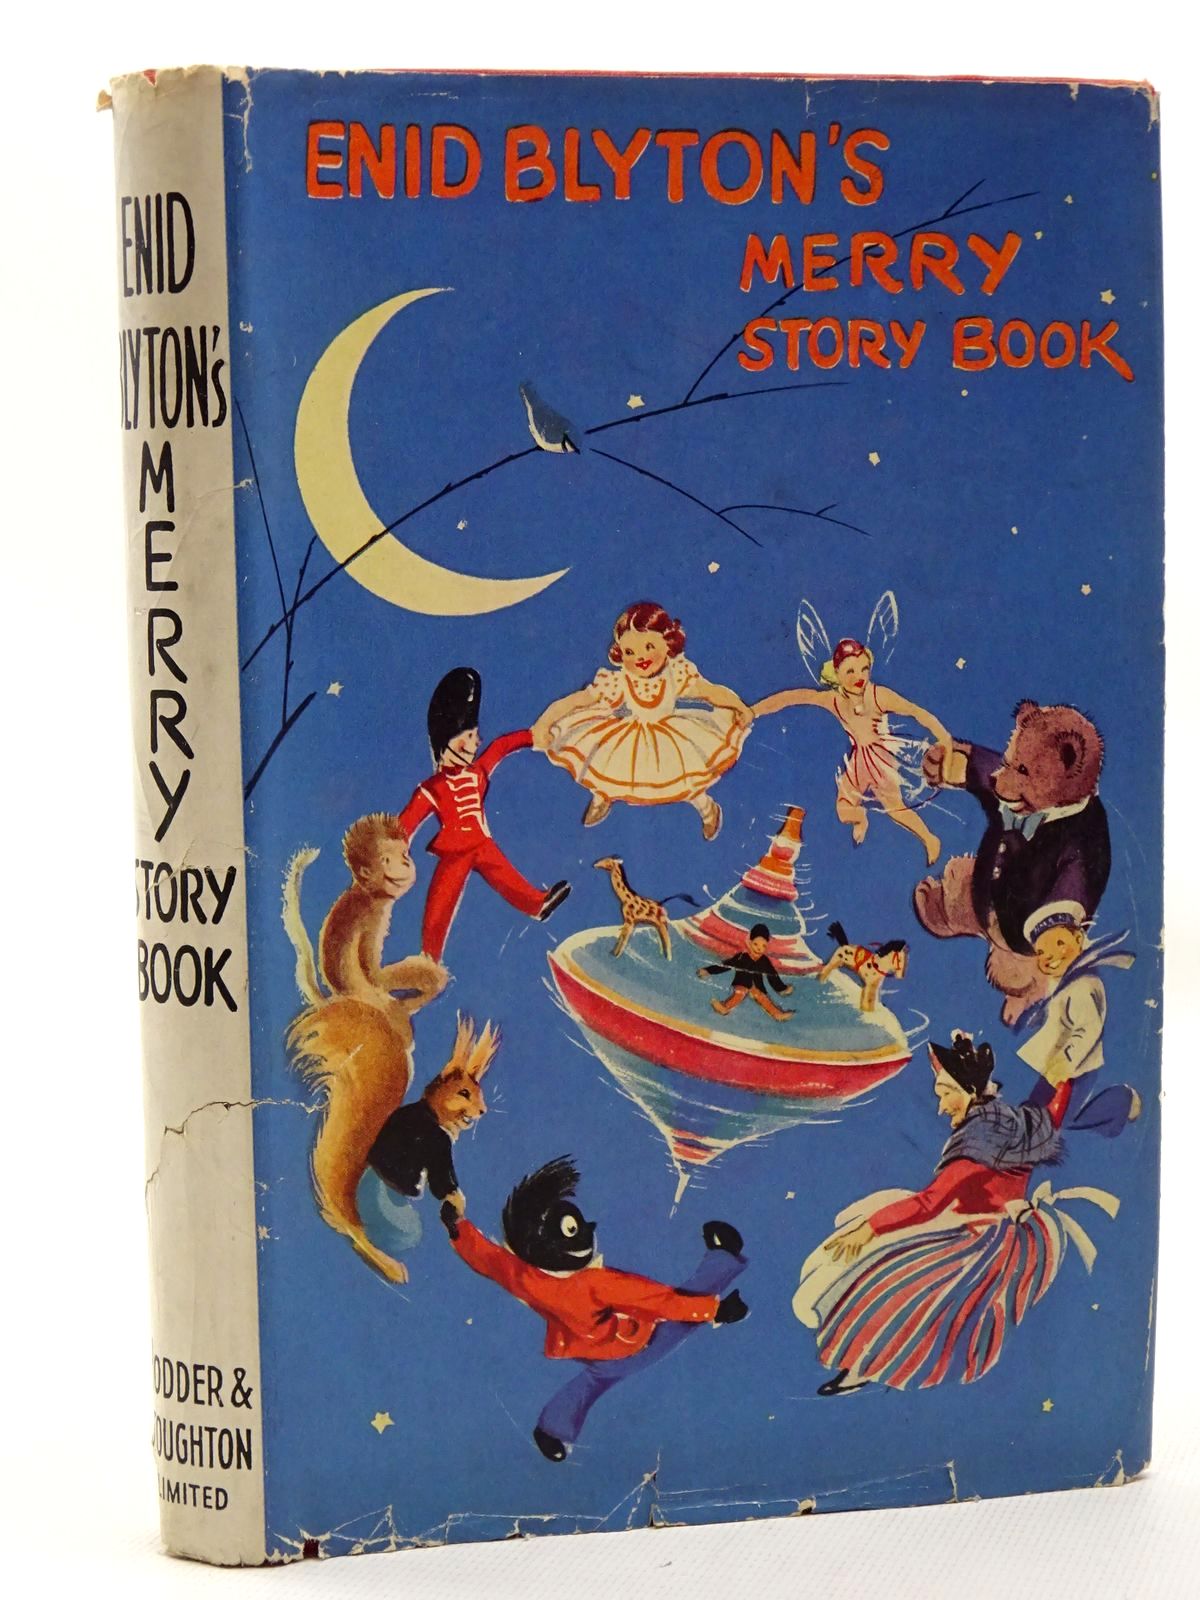 Cover of ENID BLYTON'S MERRY STORY BOOK by Enid Blyton